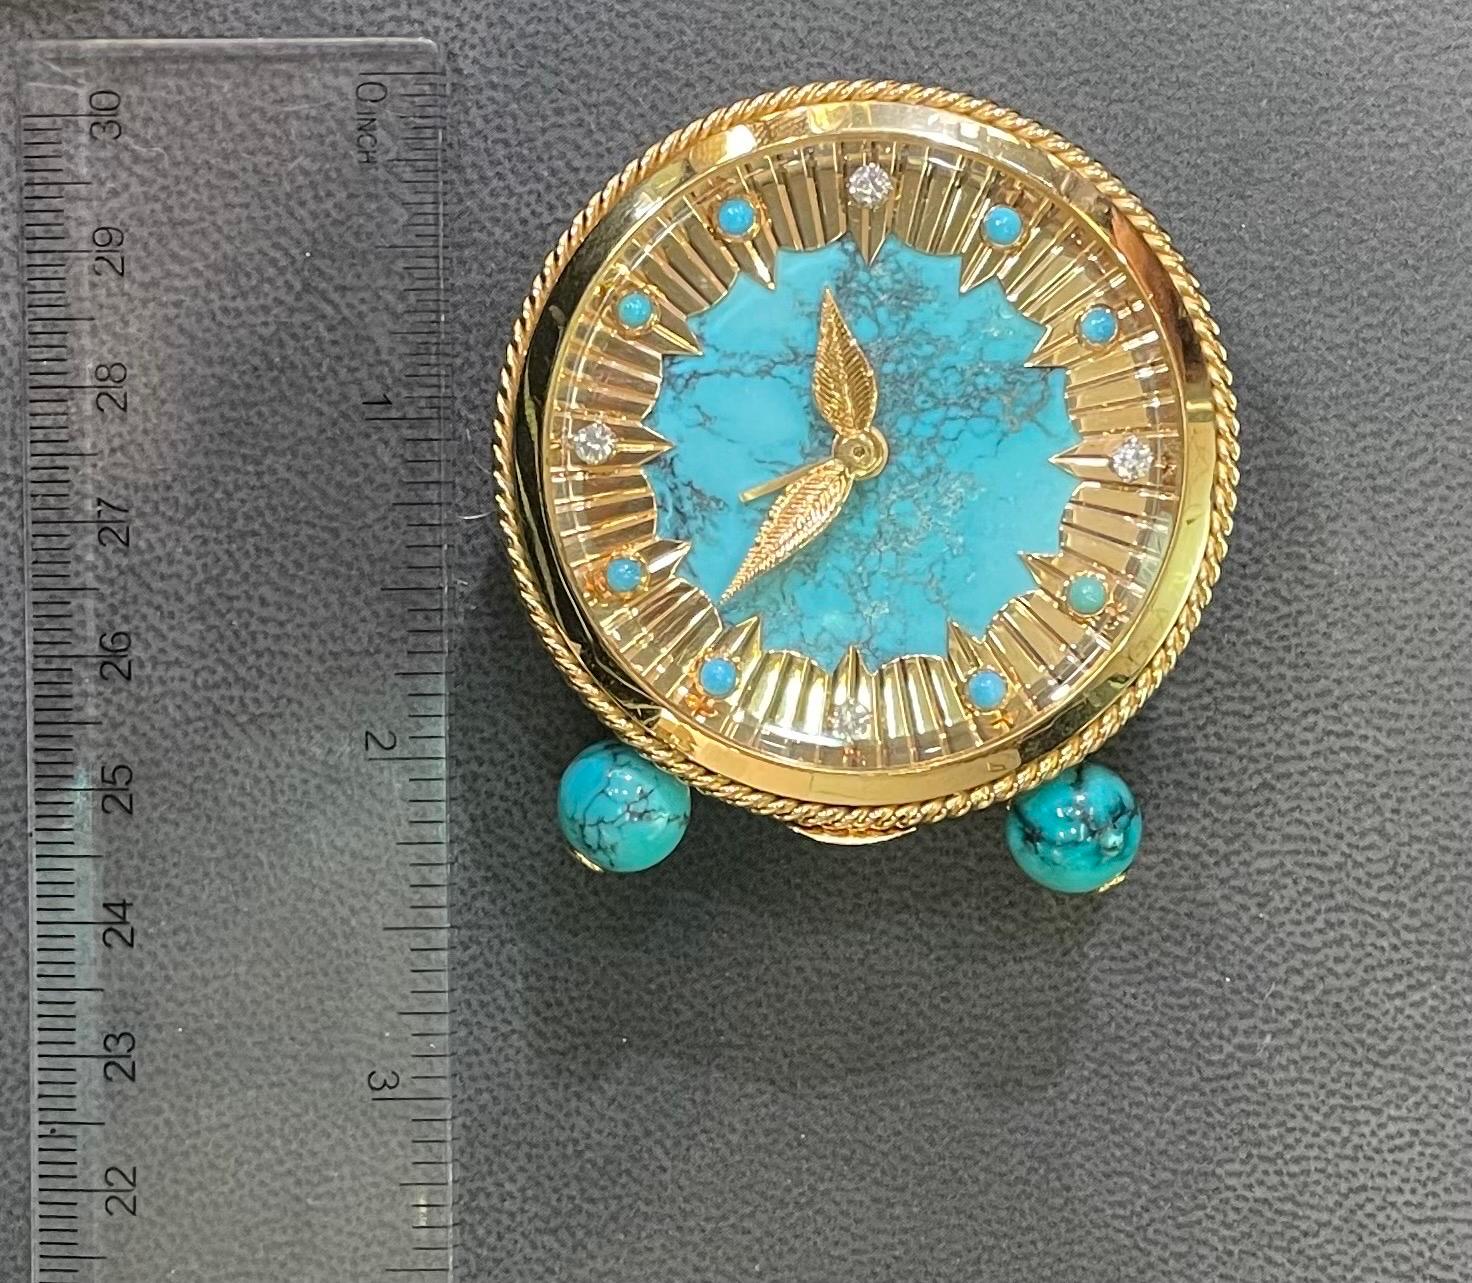 Van Cleef and Arpels Gold and Turquoise Desk Clock In Excellent Condition For Sale In New York, NY